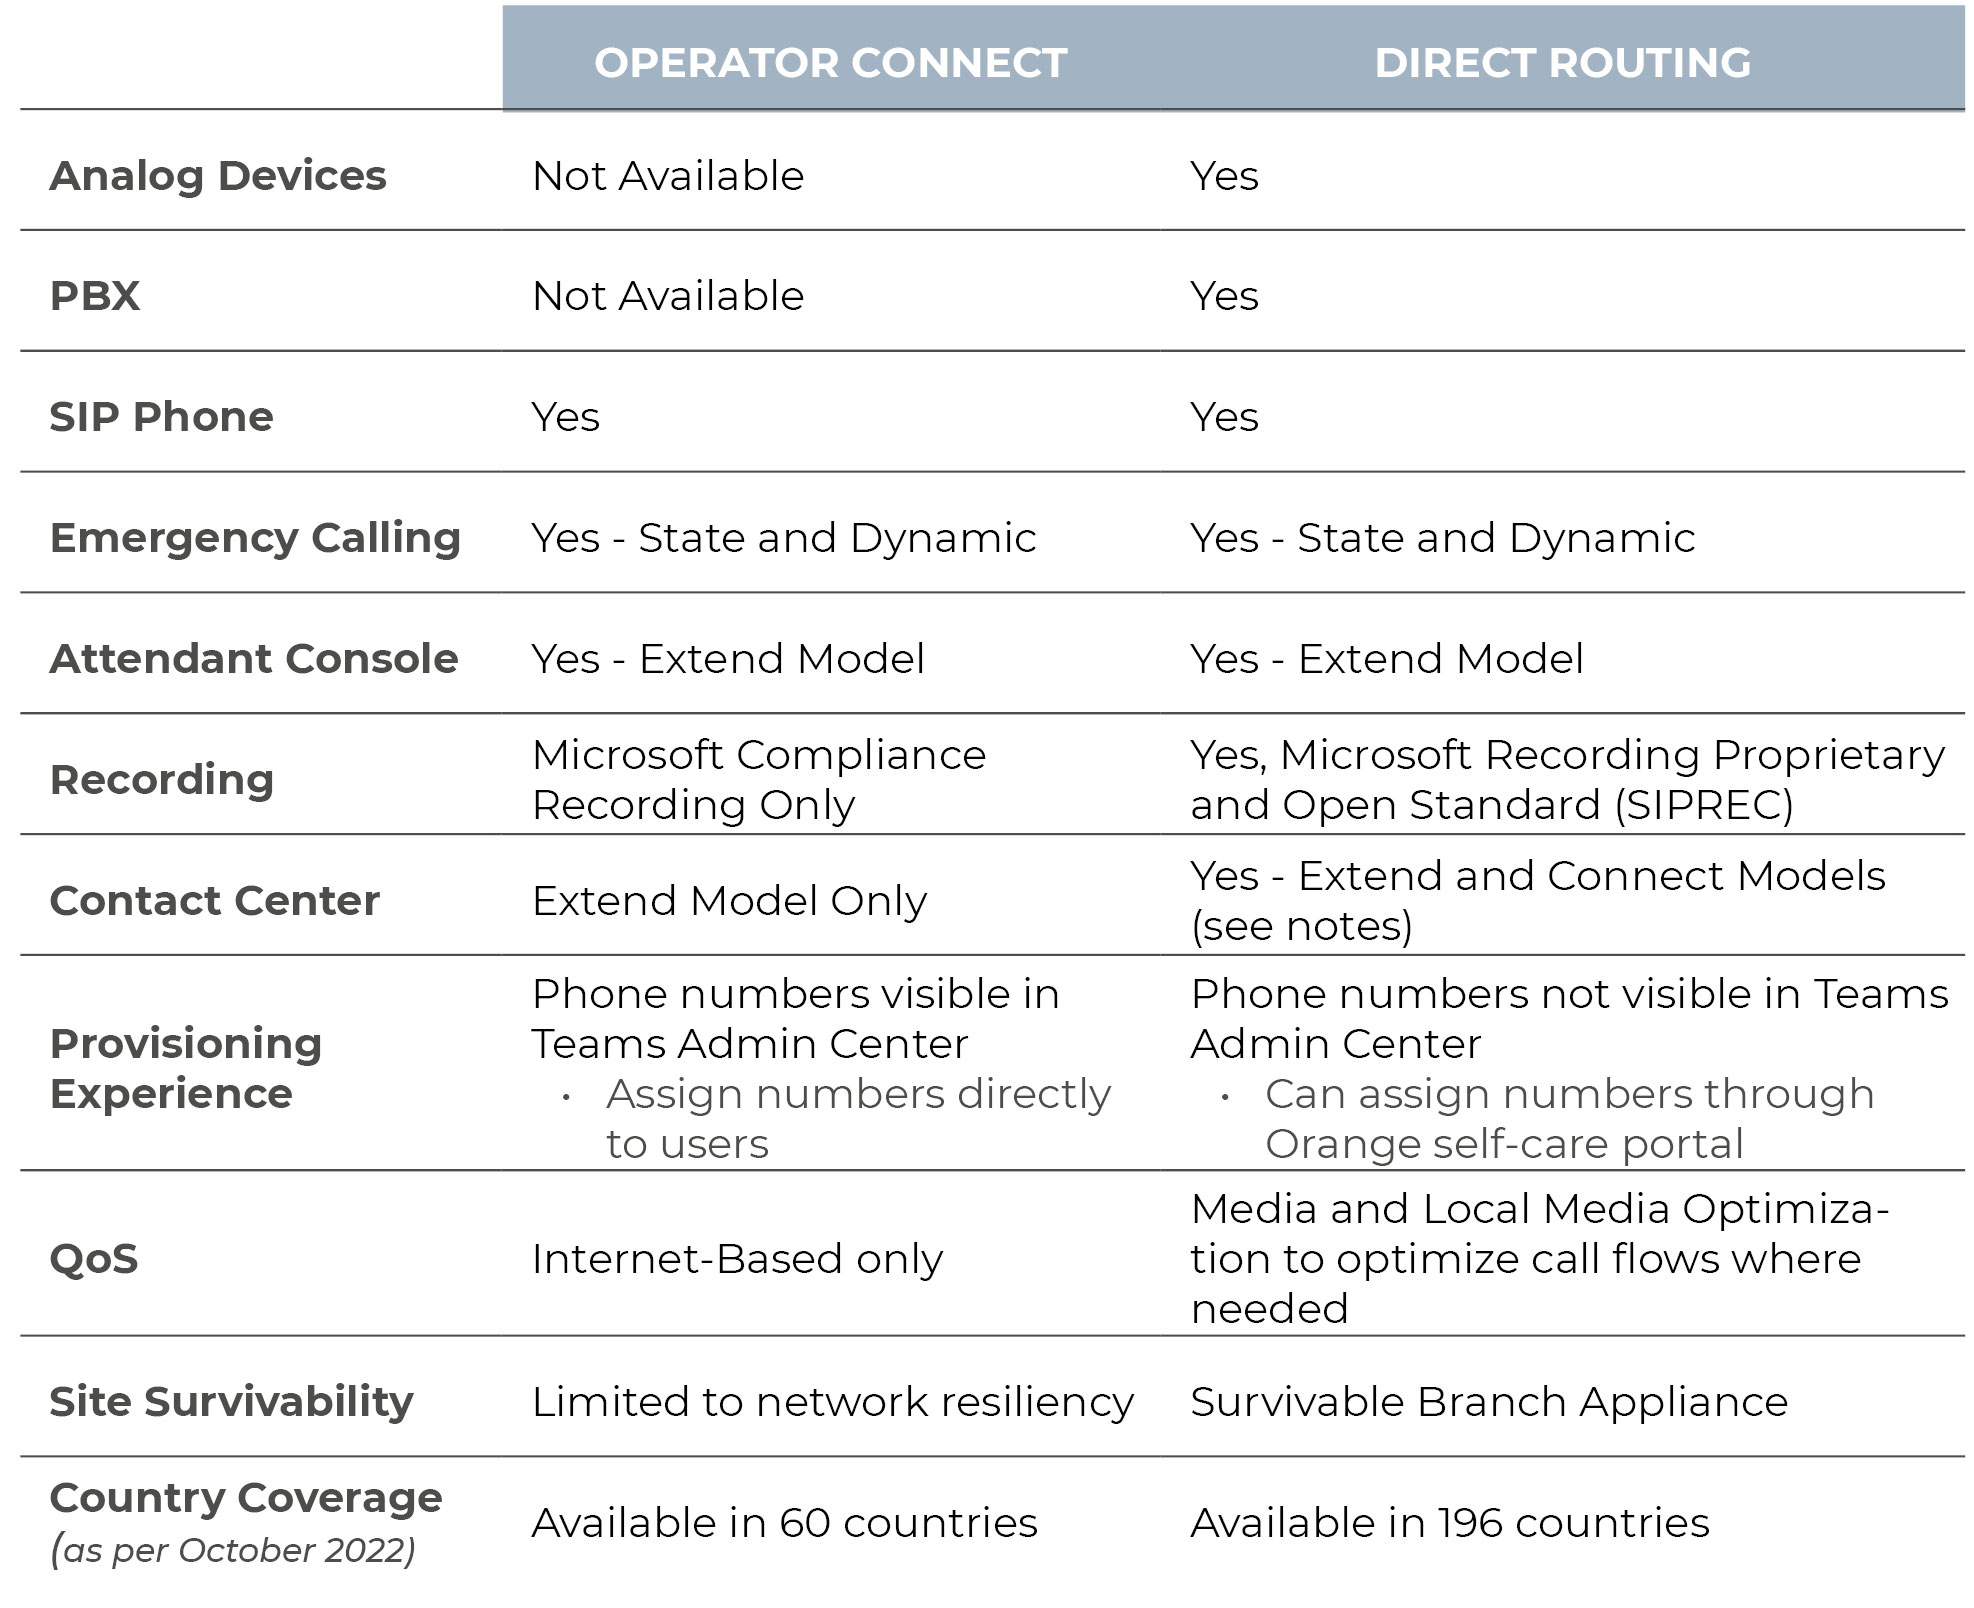 While Microsoft doesn’t as yet offer full feature parity between Direct Routing and Operator Connect, the latter can be customized depending on your operator. You can see a detailed comparison of the two options in the chart.